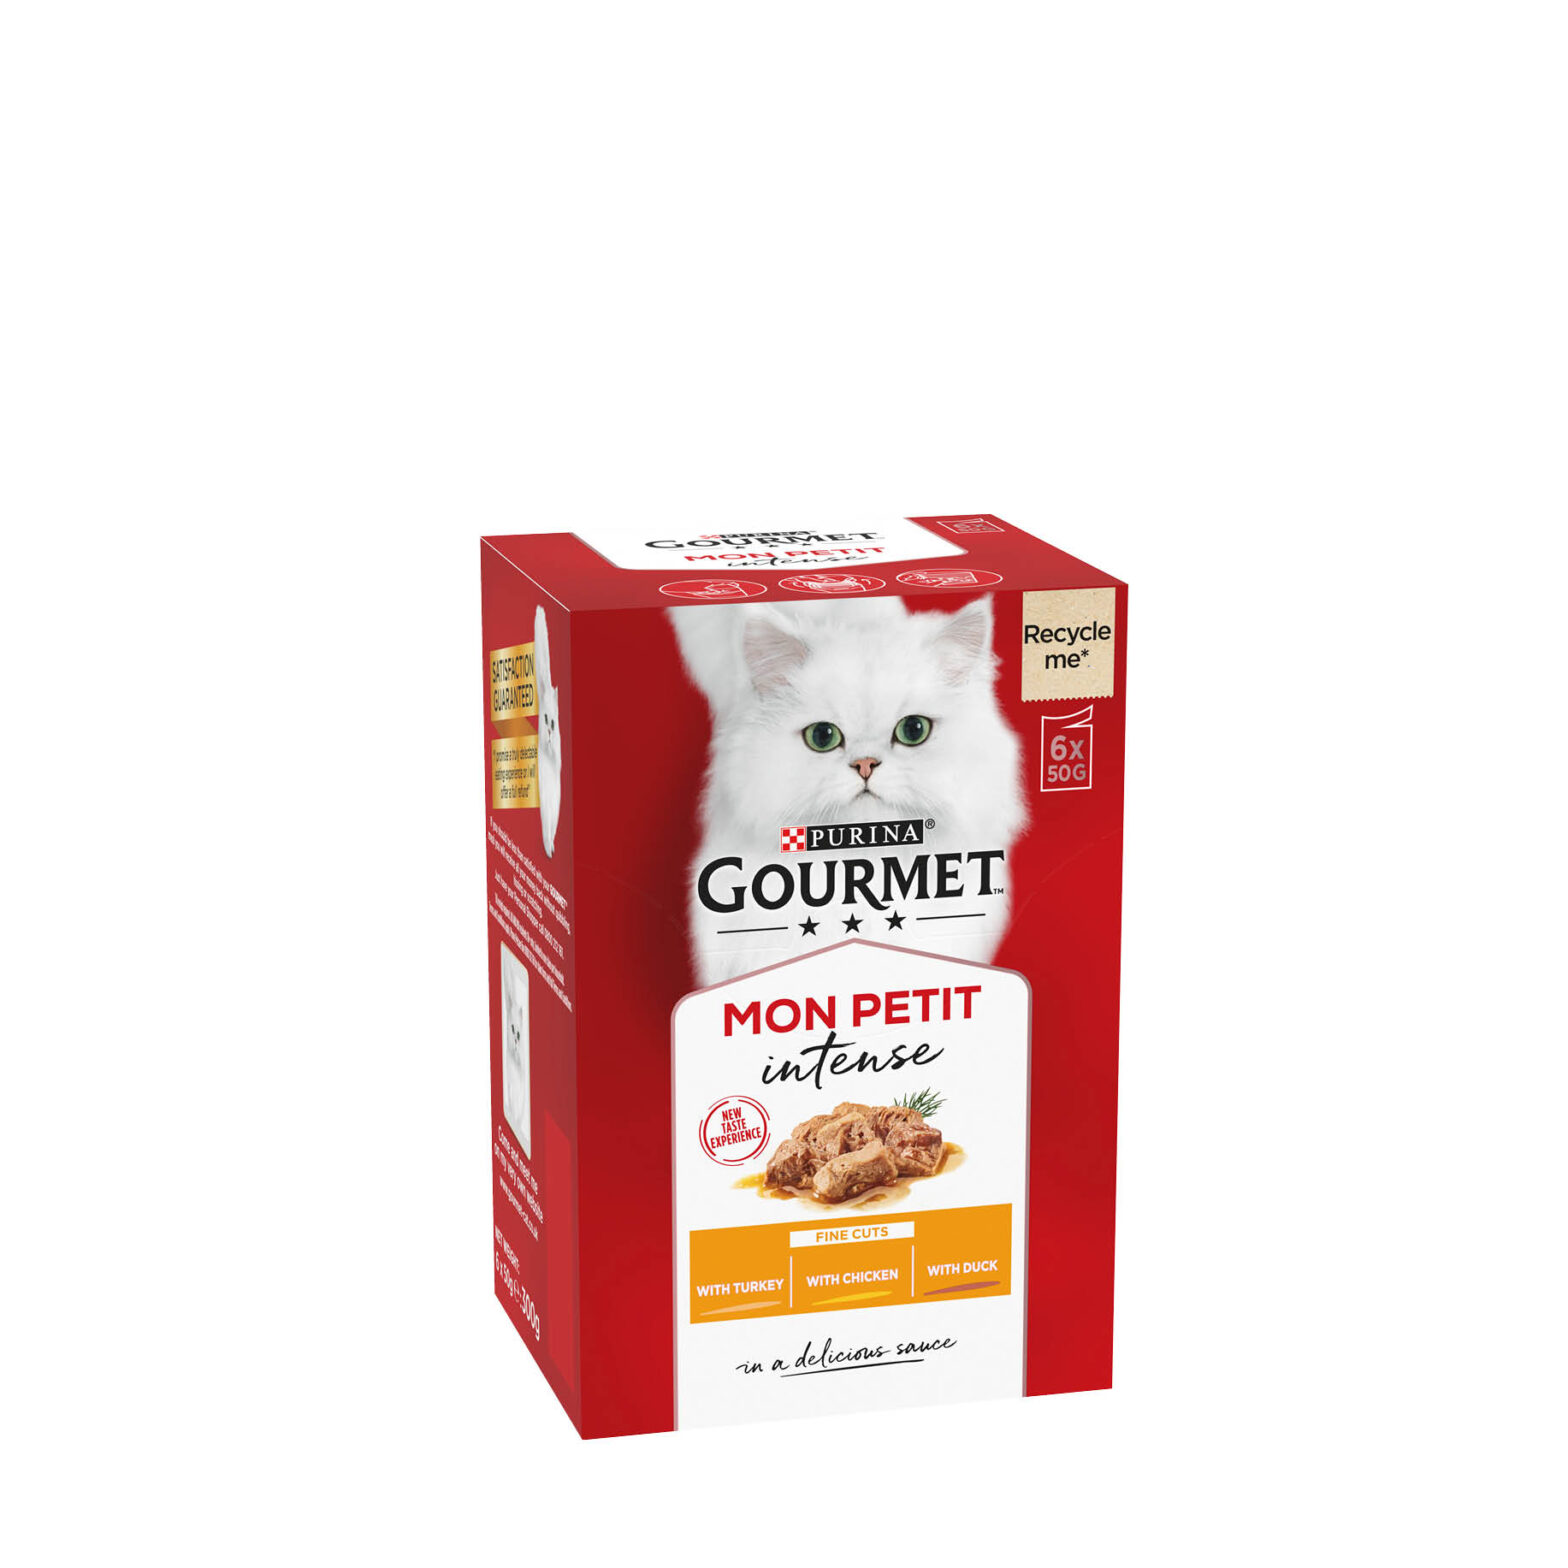 Purina Gourmet Fine Cuts Cat Food Pouch Poultry